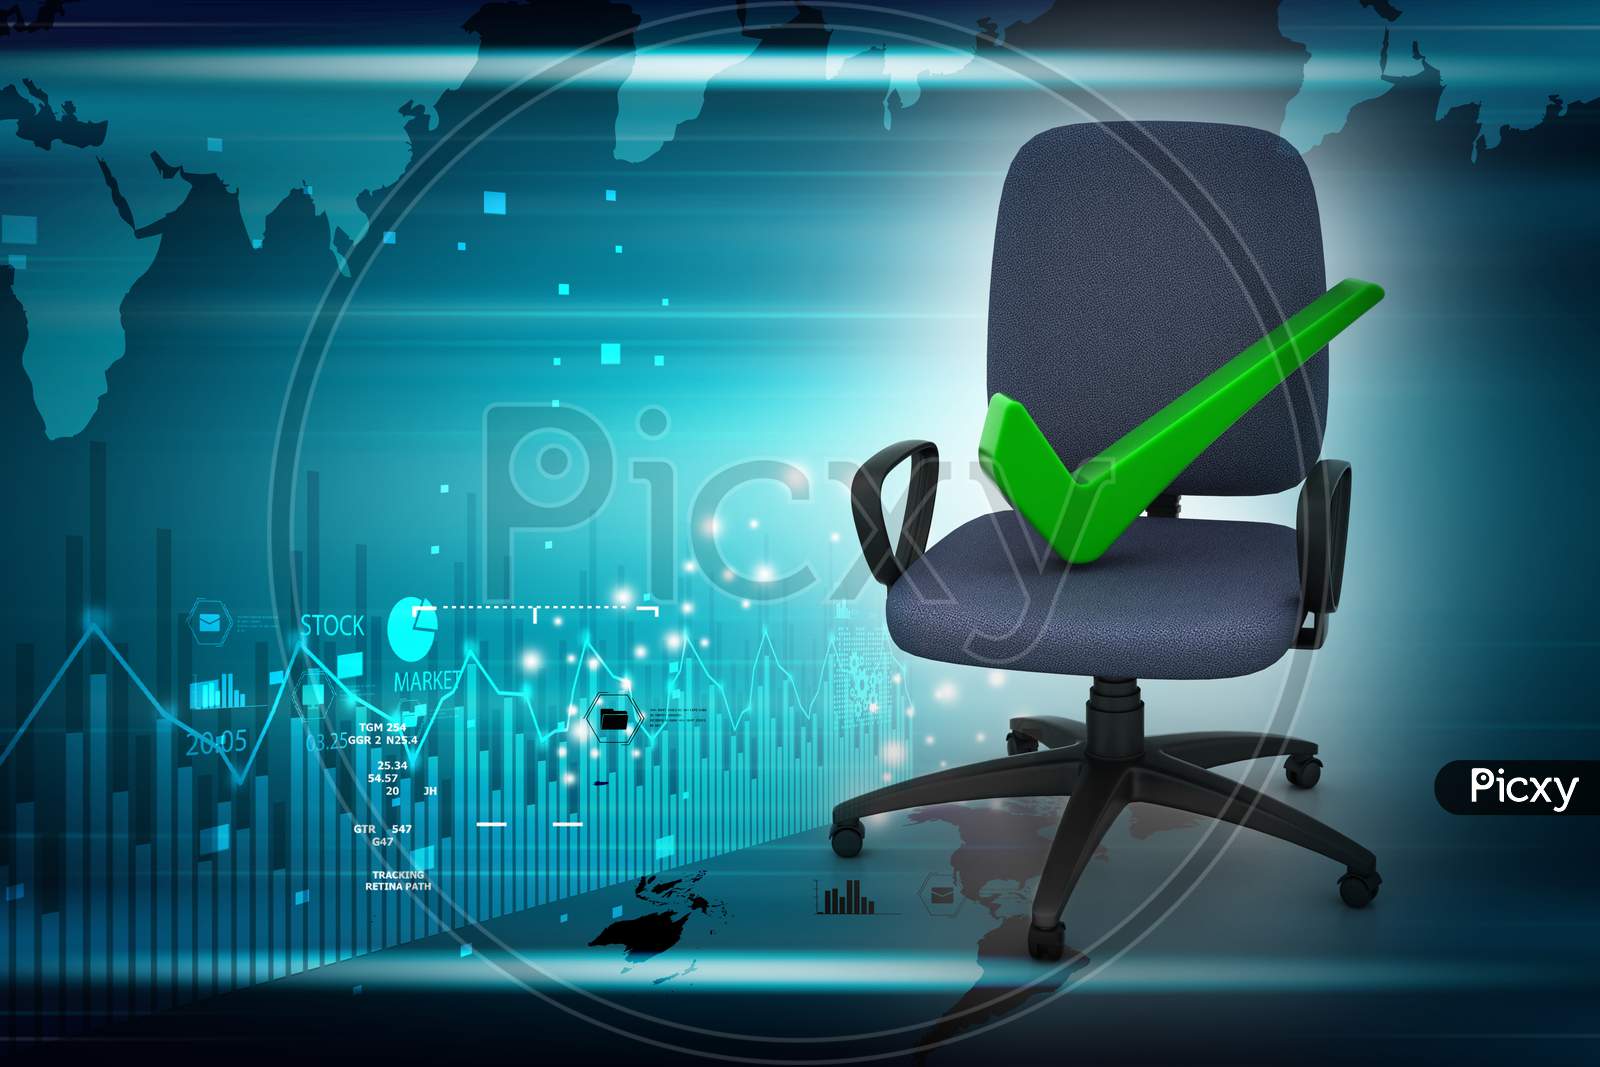 Right Mark Sitting Comfortable Computer Chair